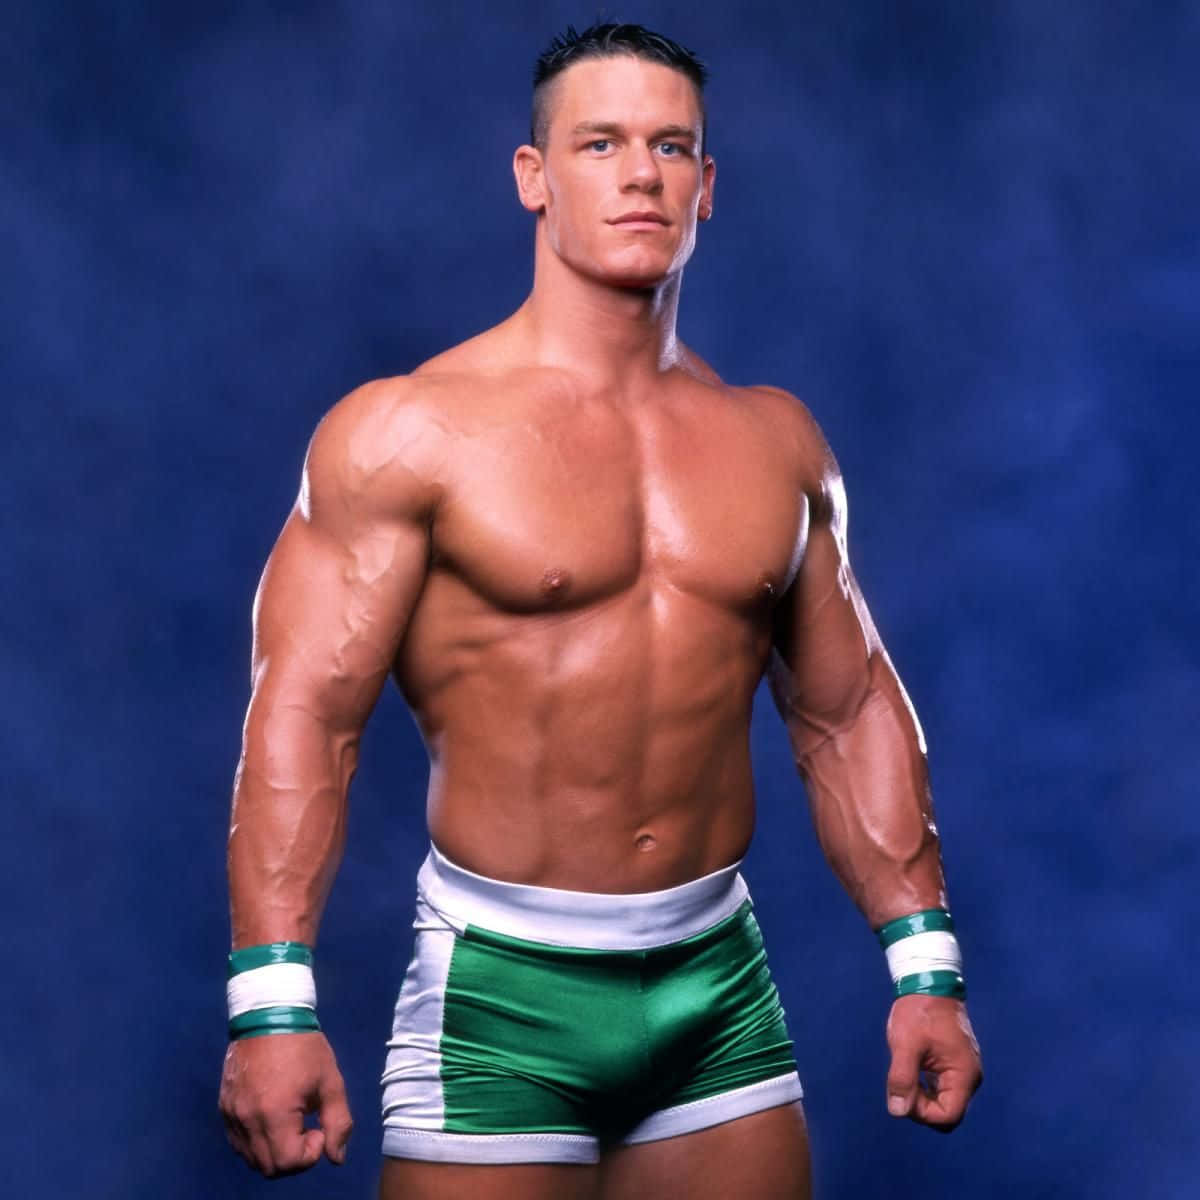 John Cena showcases his legendary "Never Give Up" attitude in the ring